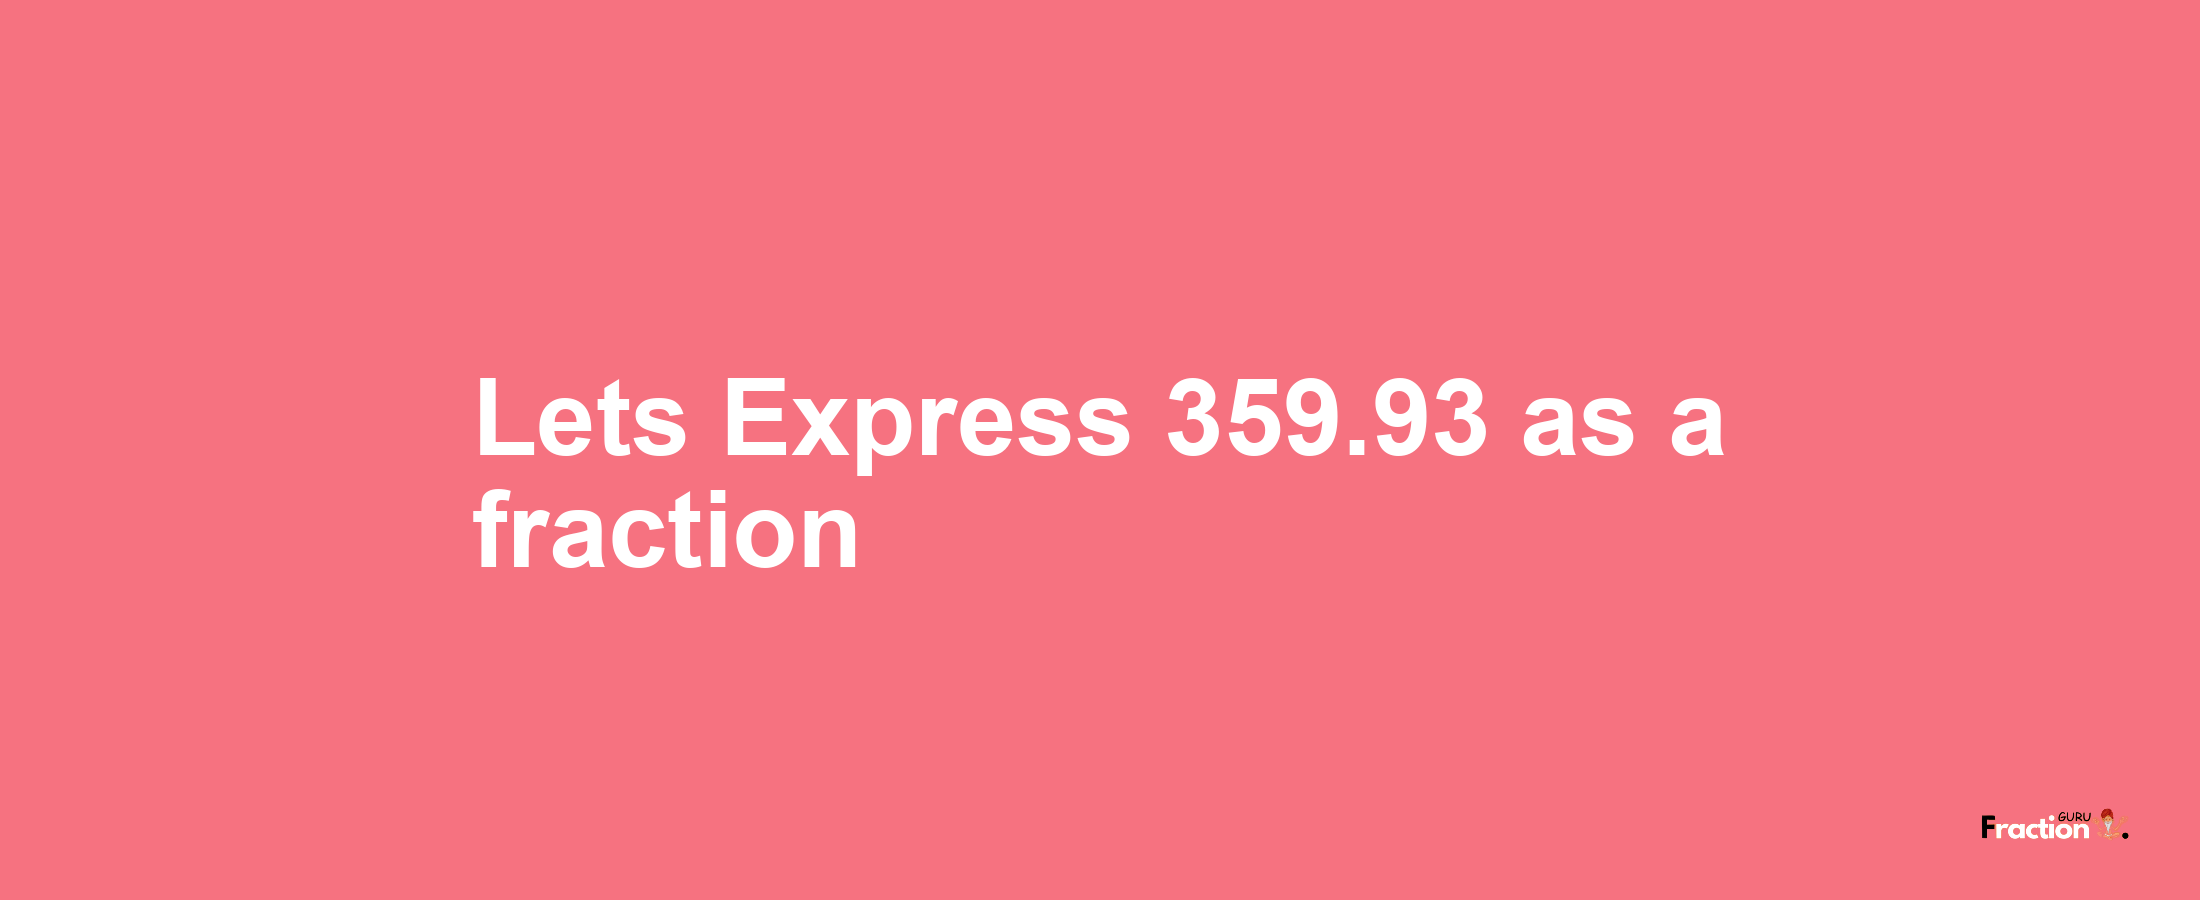 Lets Express 359.93 as afraction